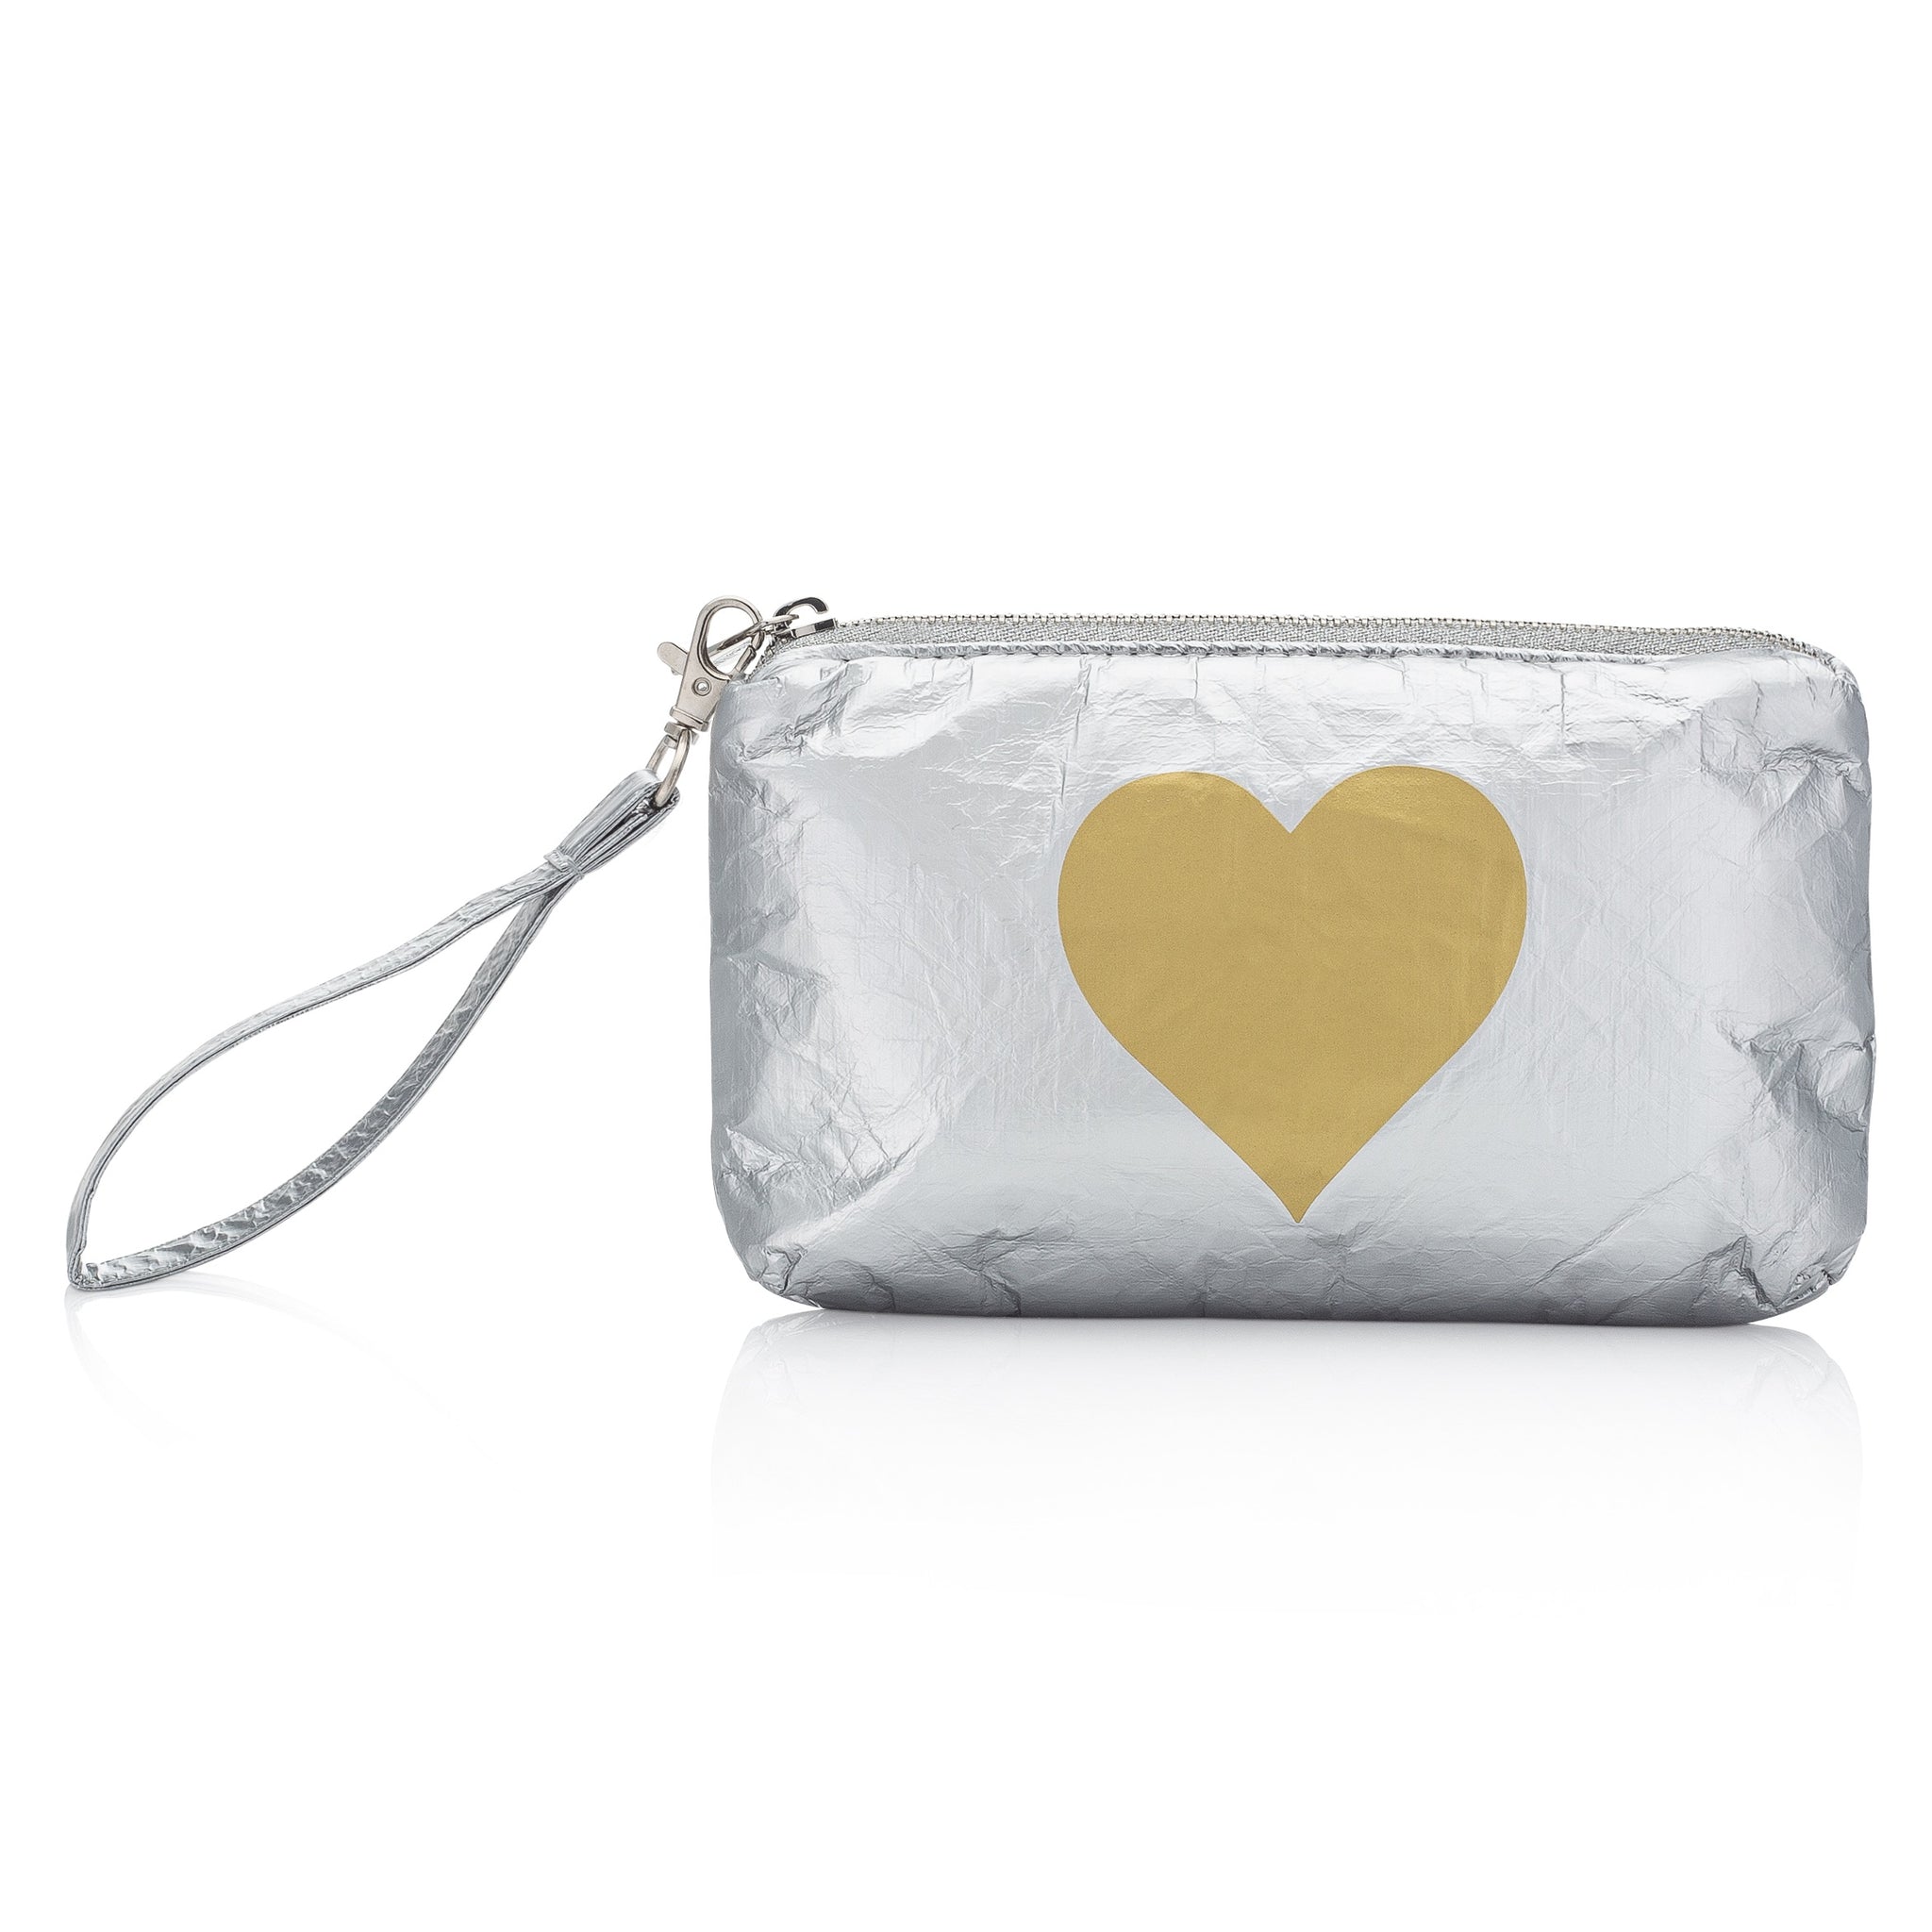 Zip Wristlet in Silver with Gold Heart